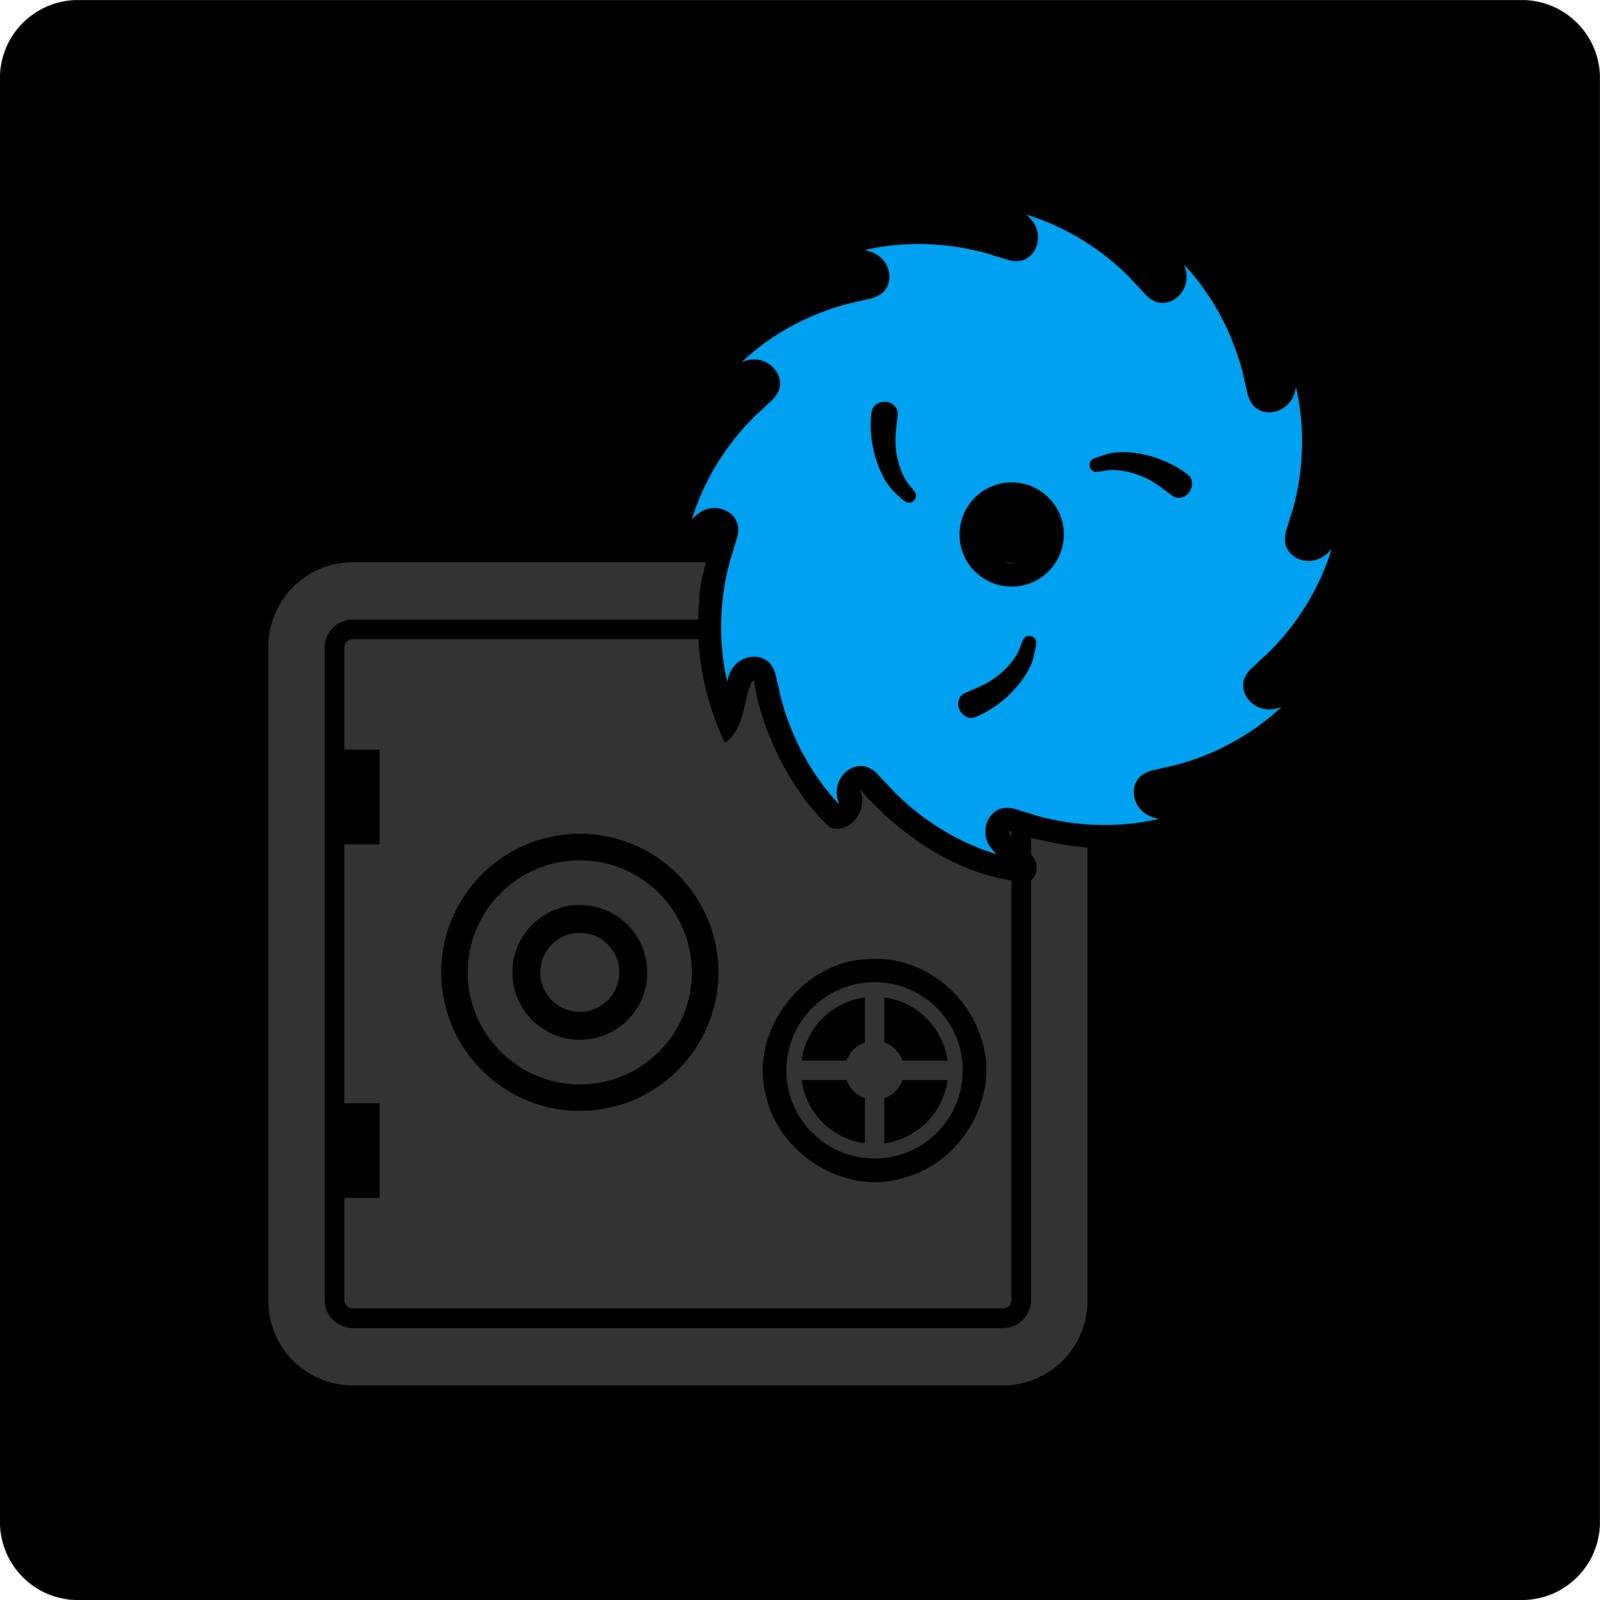 Hacking theft icon by ahasoft